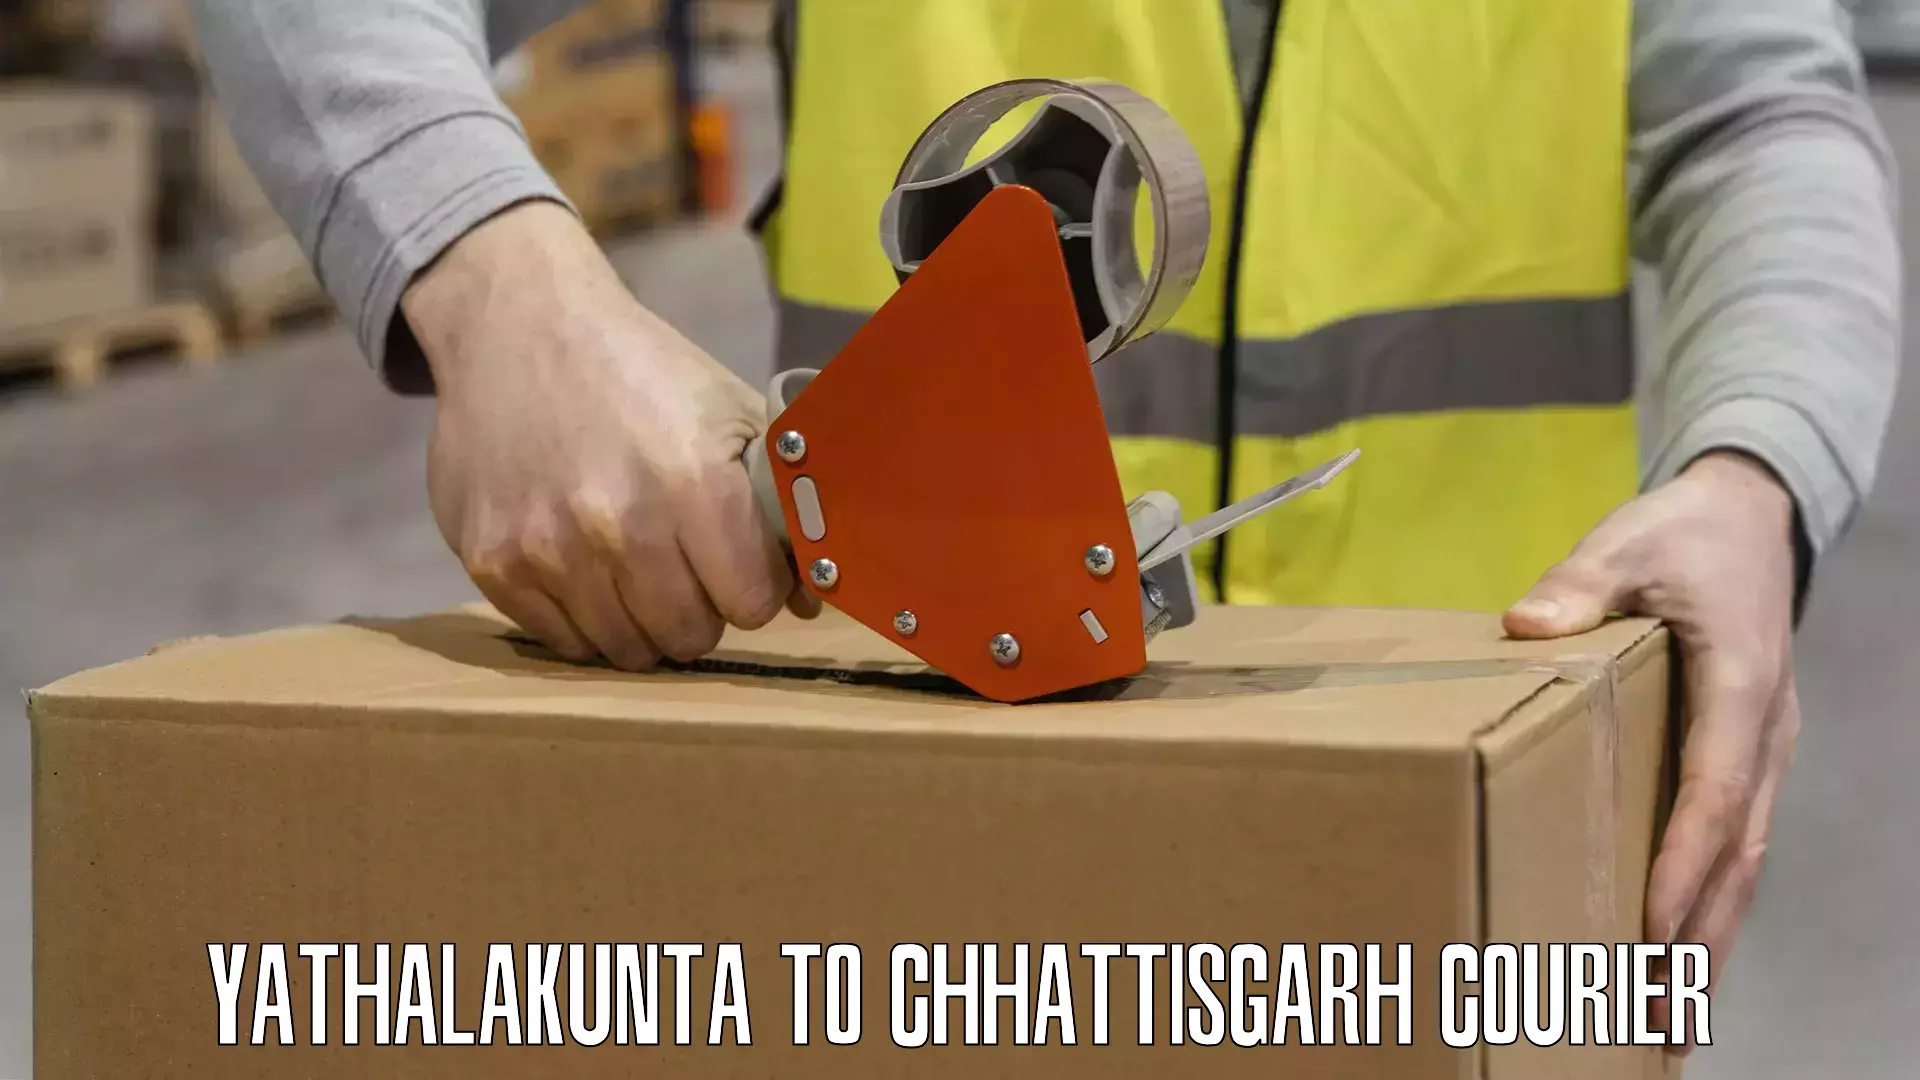 State-of-the-art courier technology Yathalakunta to Korba